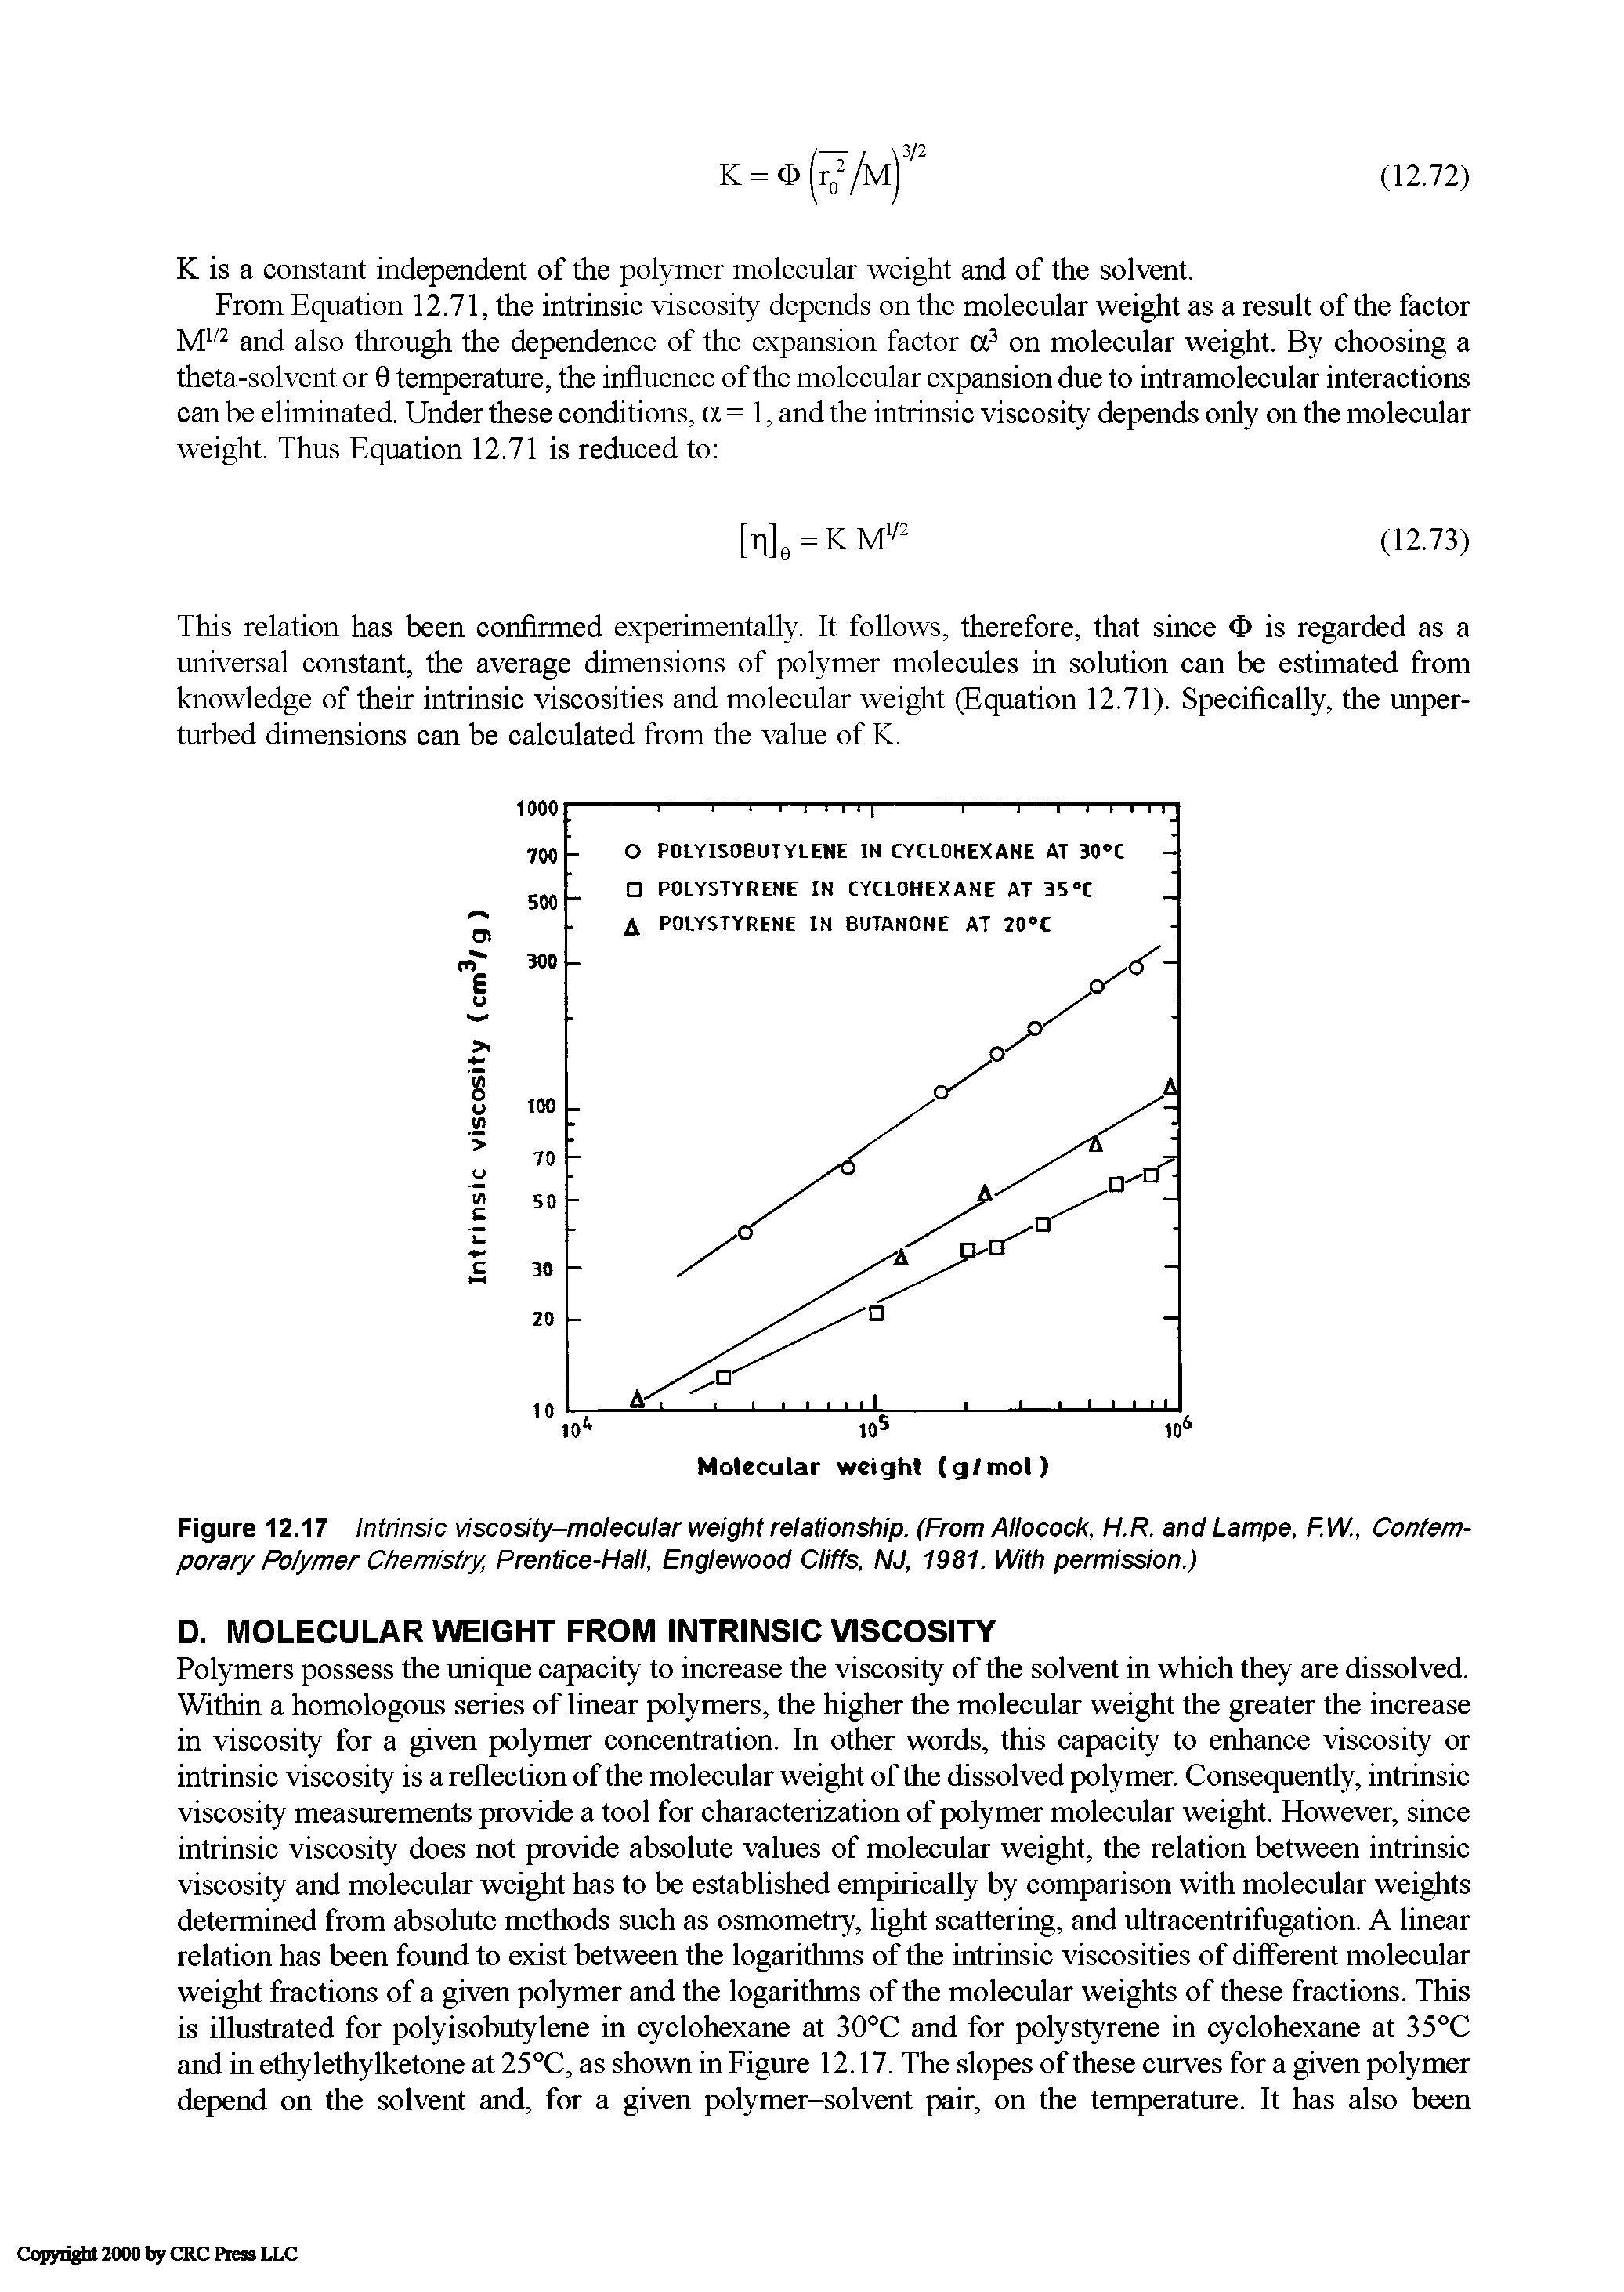 Figure 12.17 Intrinsic viscosity-molecular weight relationship. (From Allocock, H.R. and Lampe, F.W., Contemporary Polymer Chemistry, Prendce-Hall, Englewood Cliffs, NJ, 1981. With permission.)...